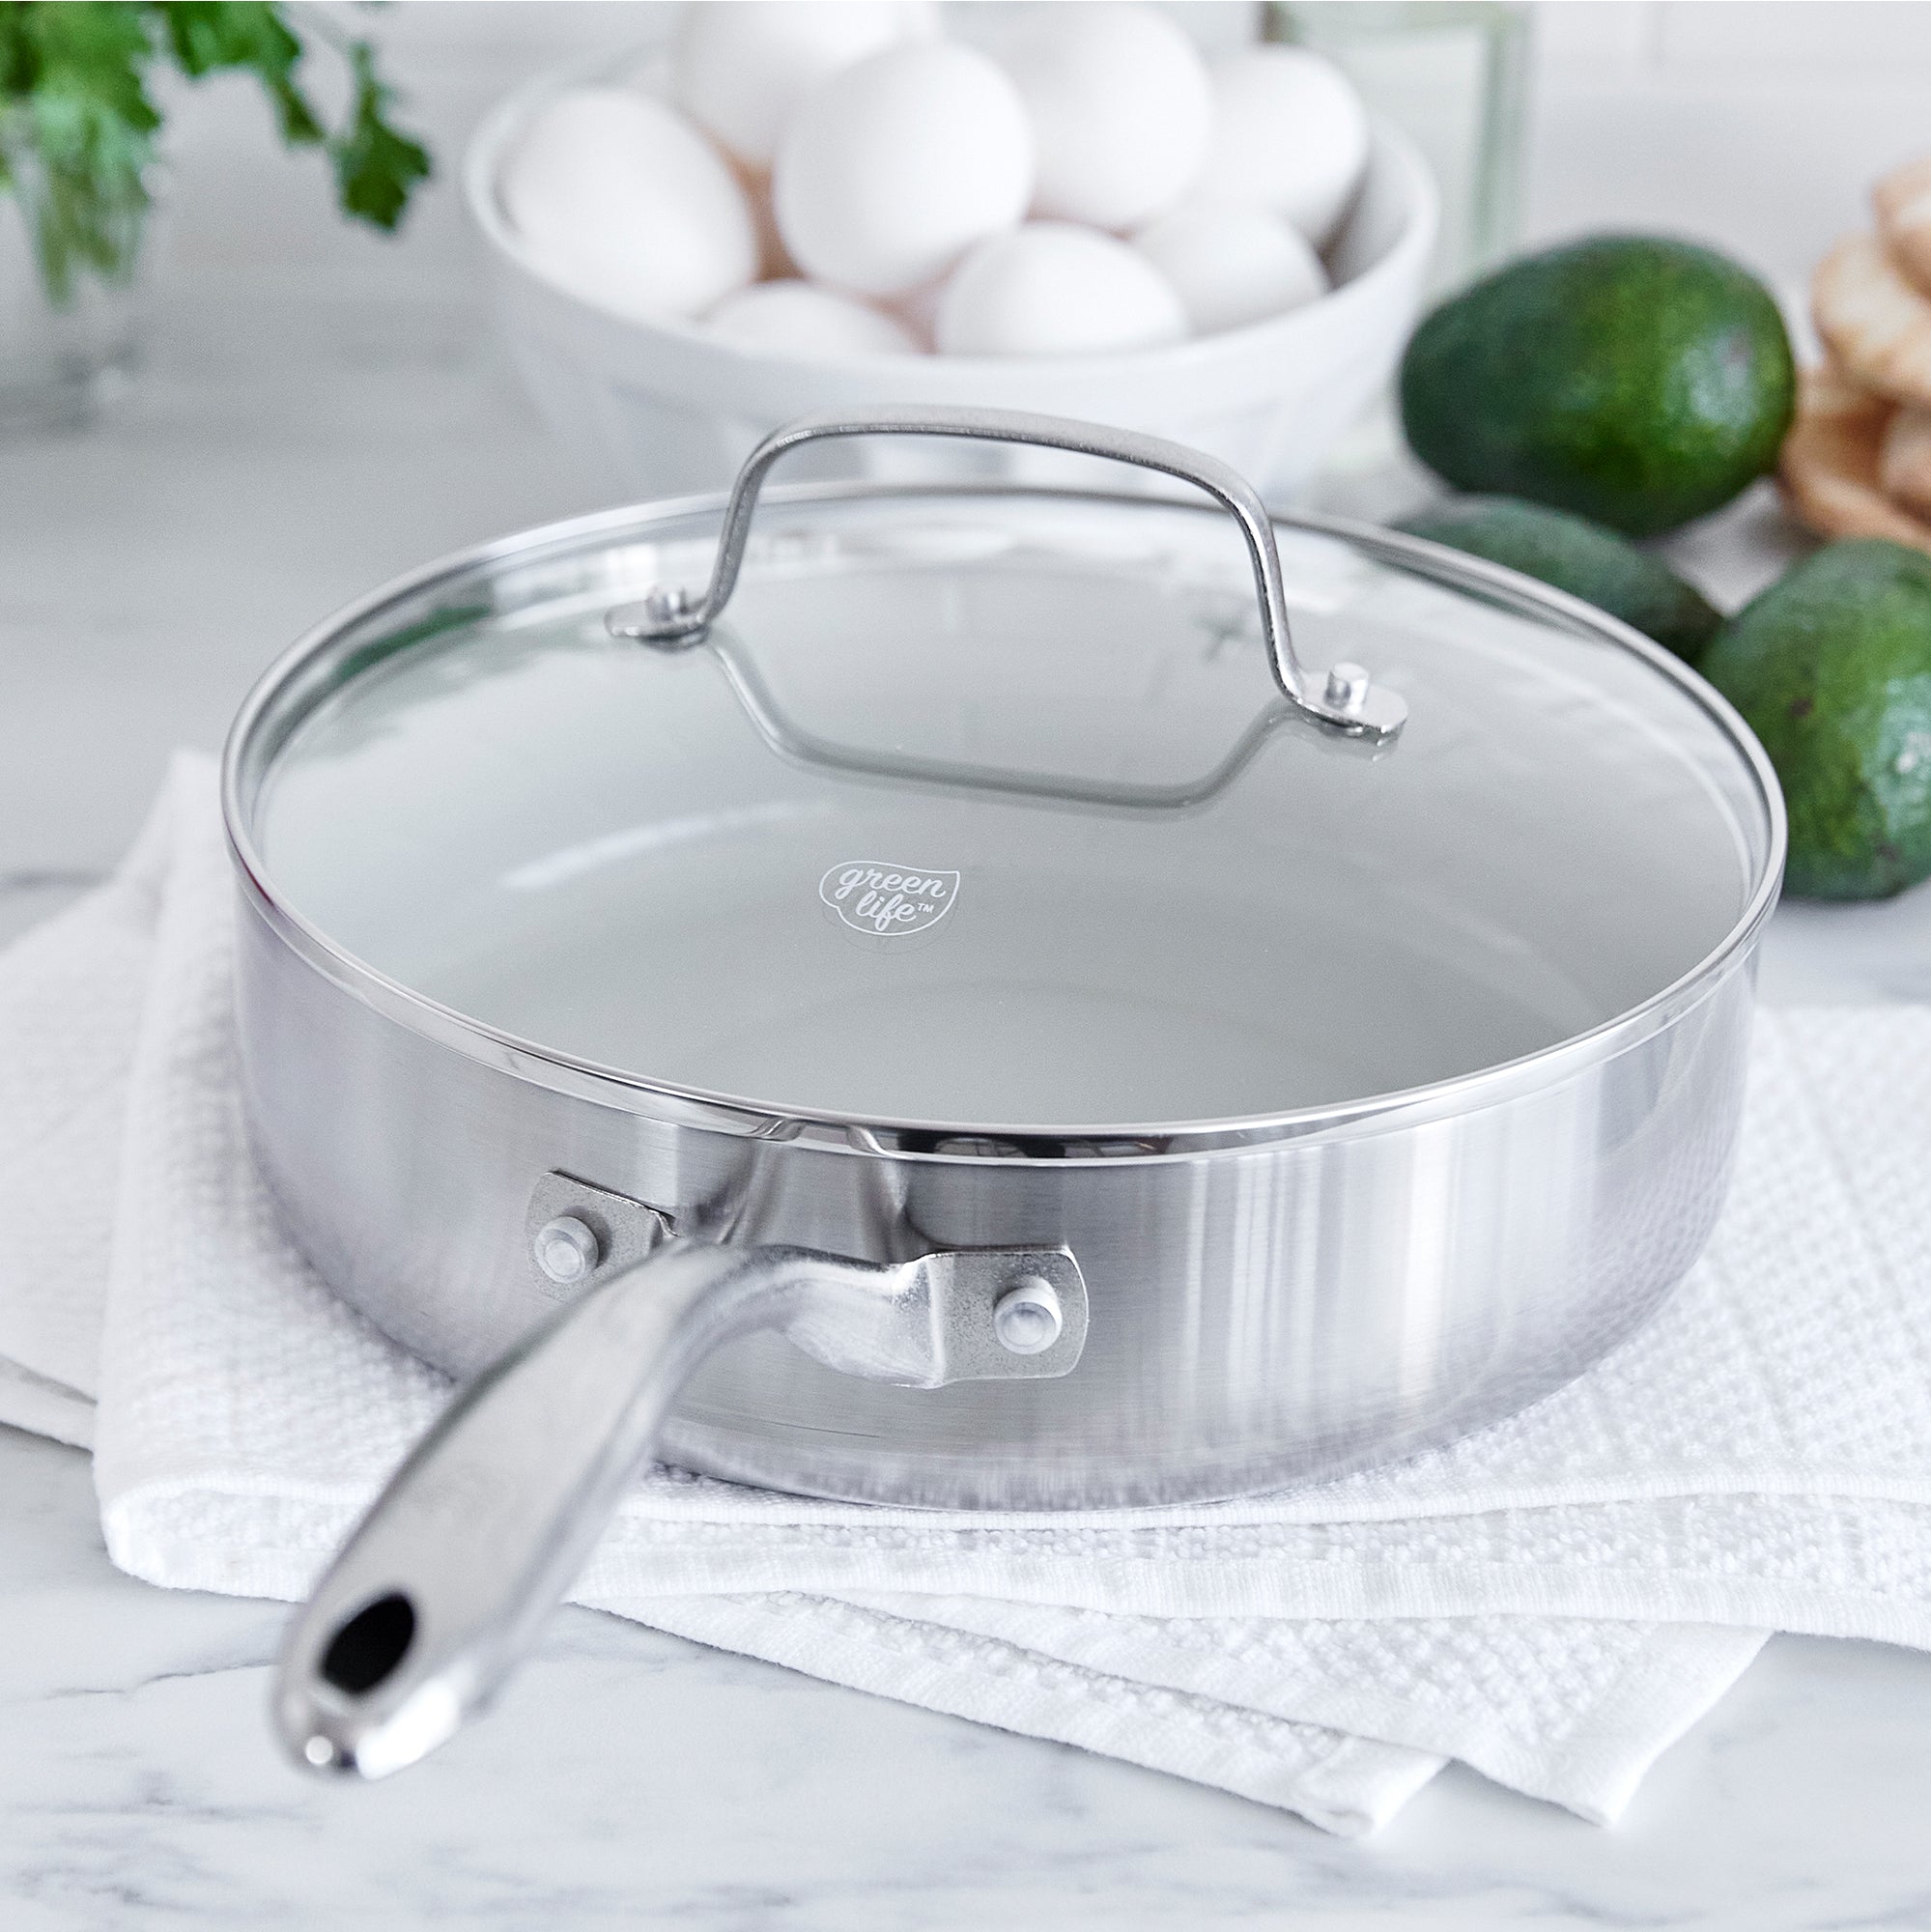 Pure Intentions Stainless Steel Stockpot, Includes Glass Lid